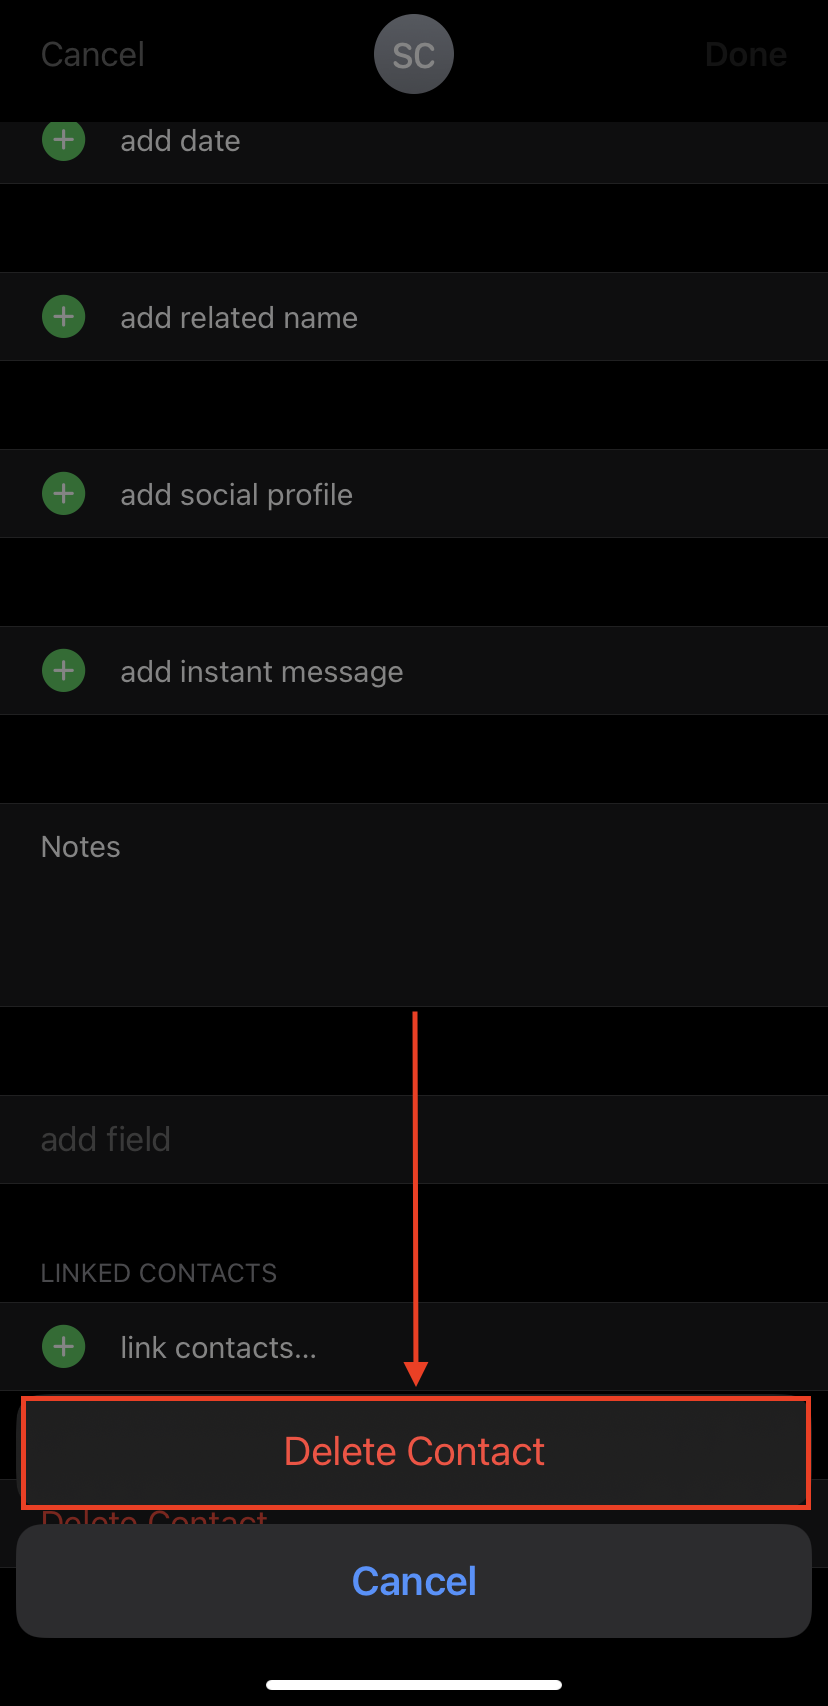 Contact deletion confirmation prompt in the iPhone's Contacts app